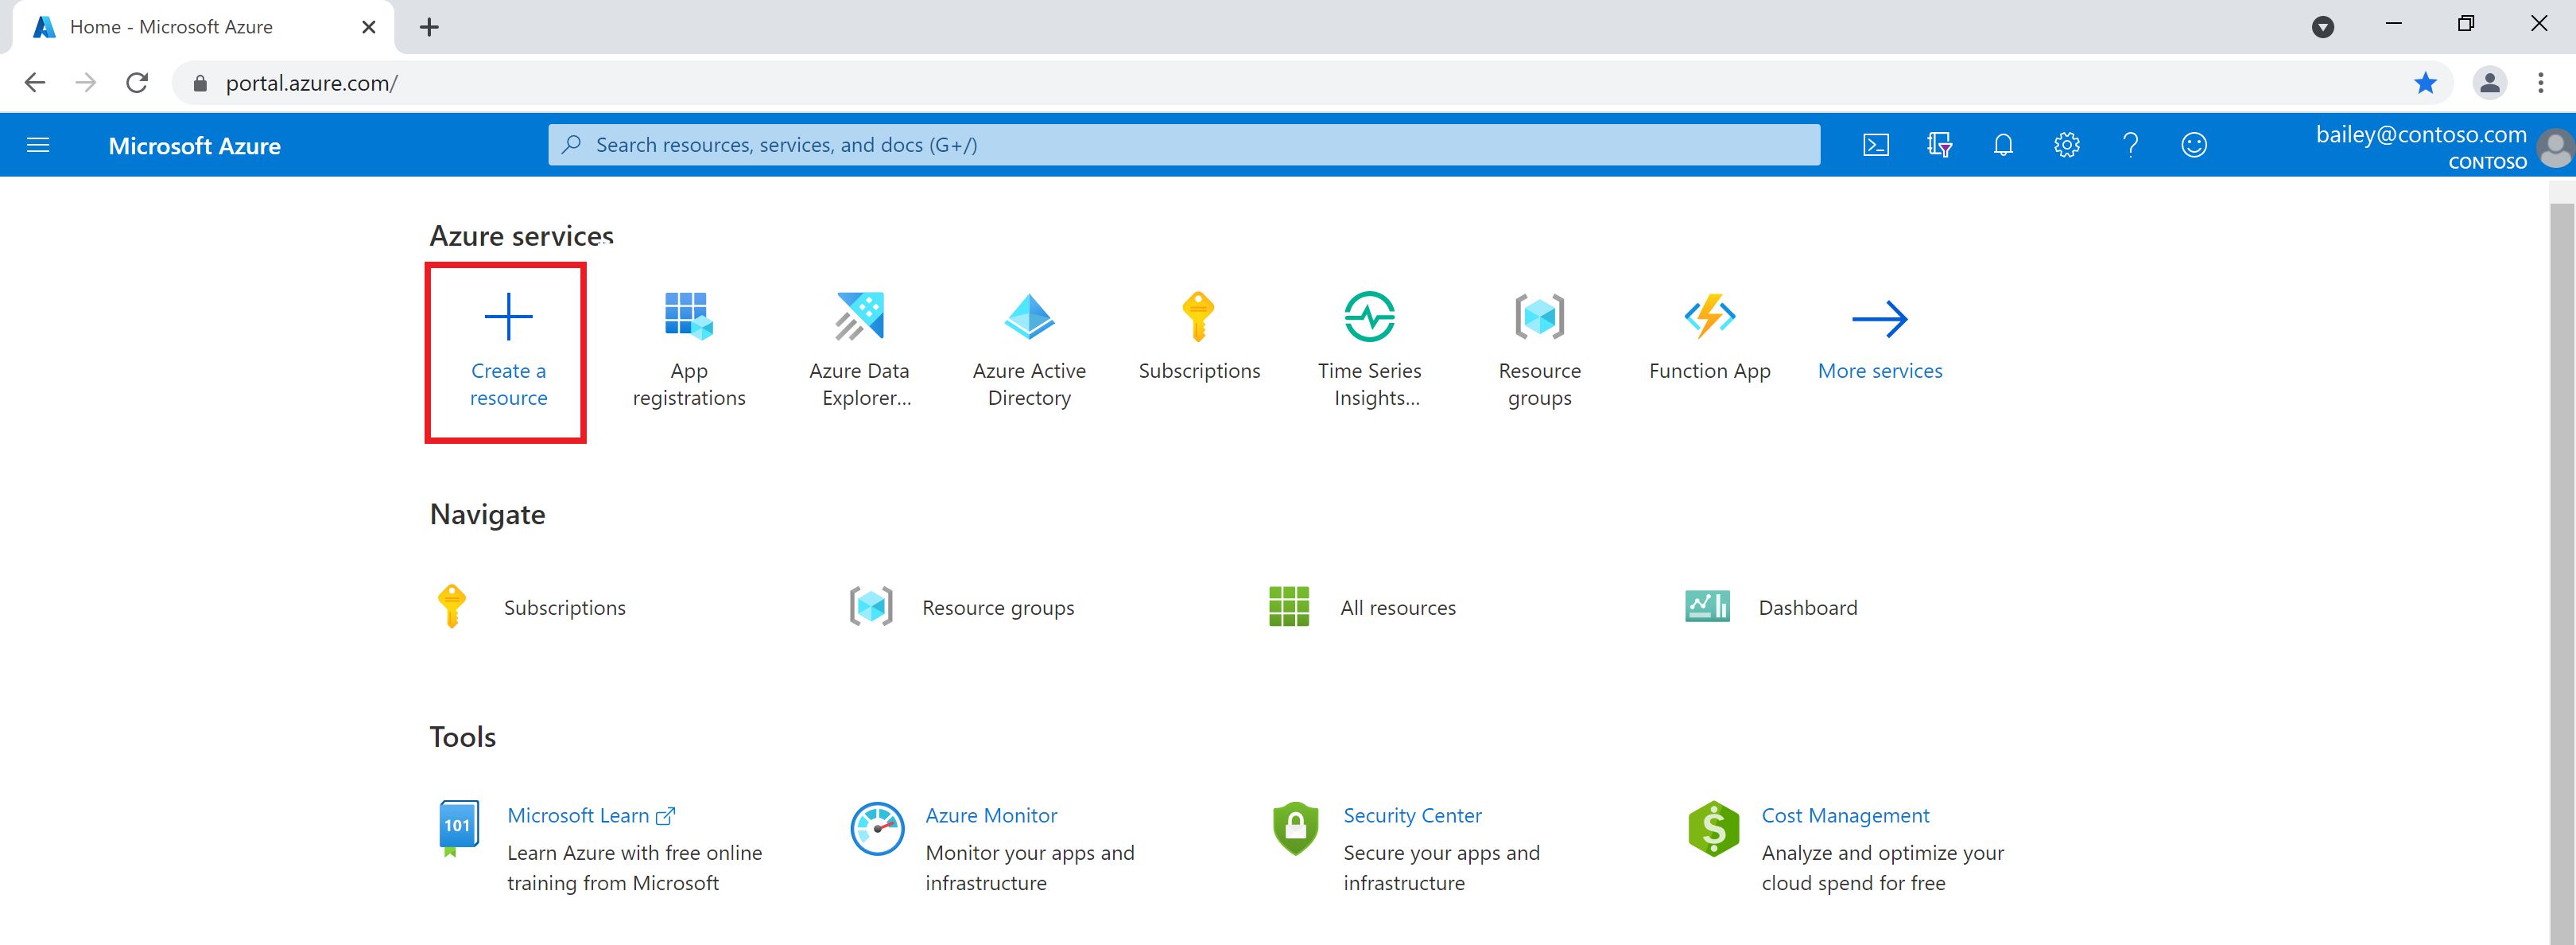 Screenshot of the Azure portal, highlighting the 'Create a resource' icon from the home page.